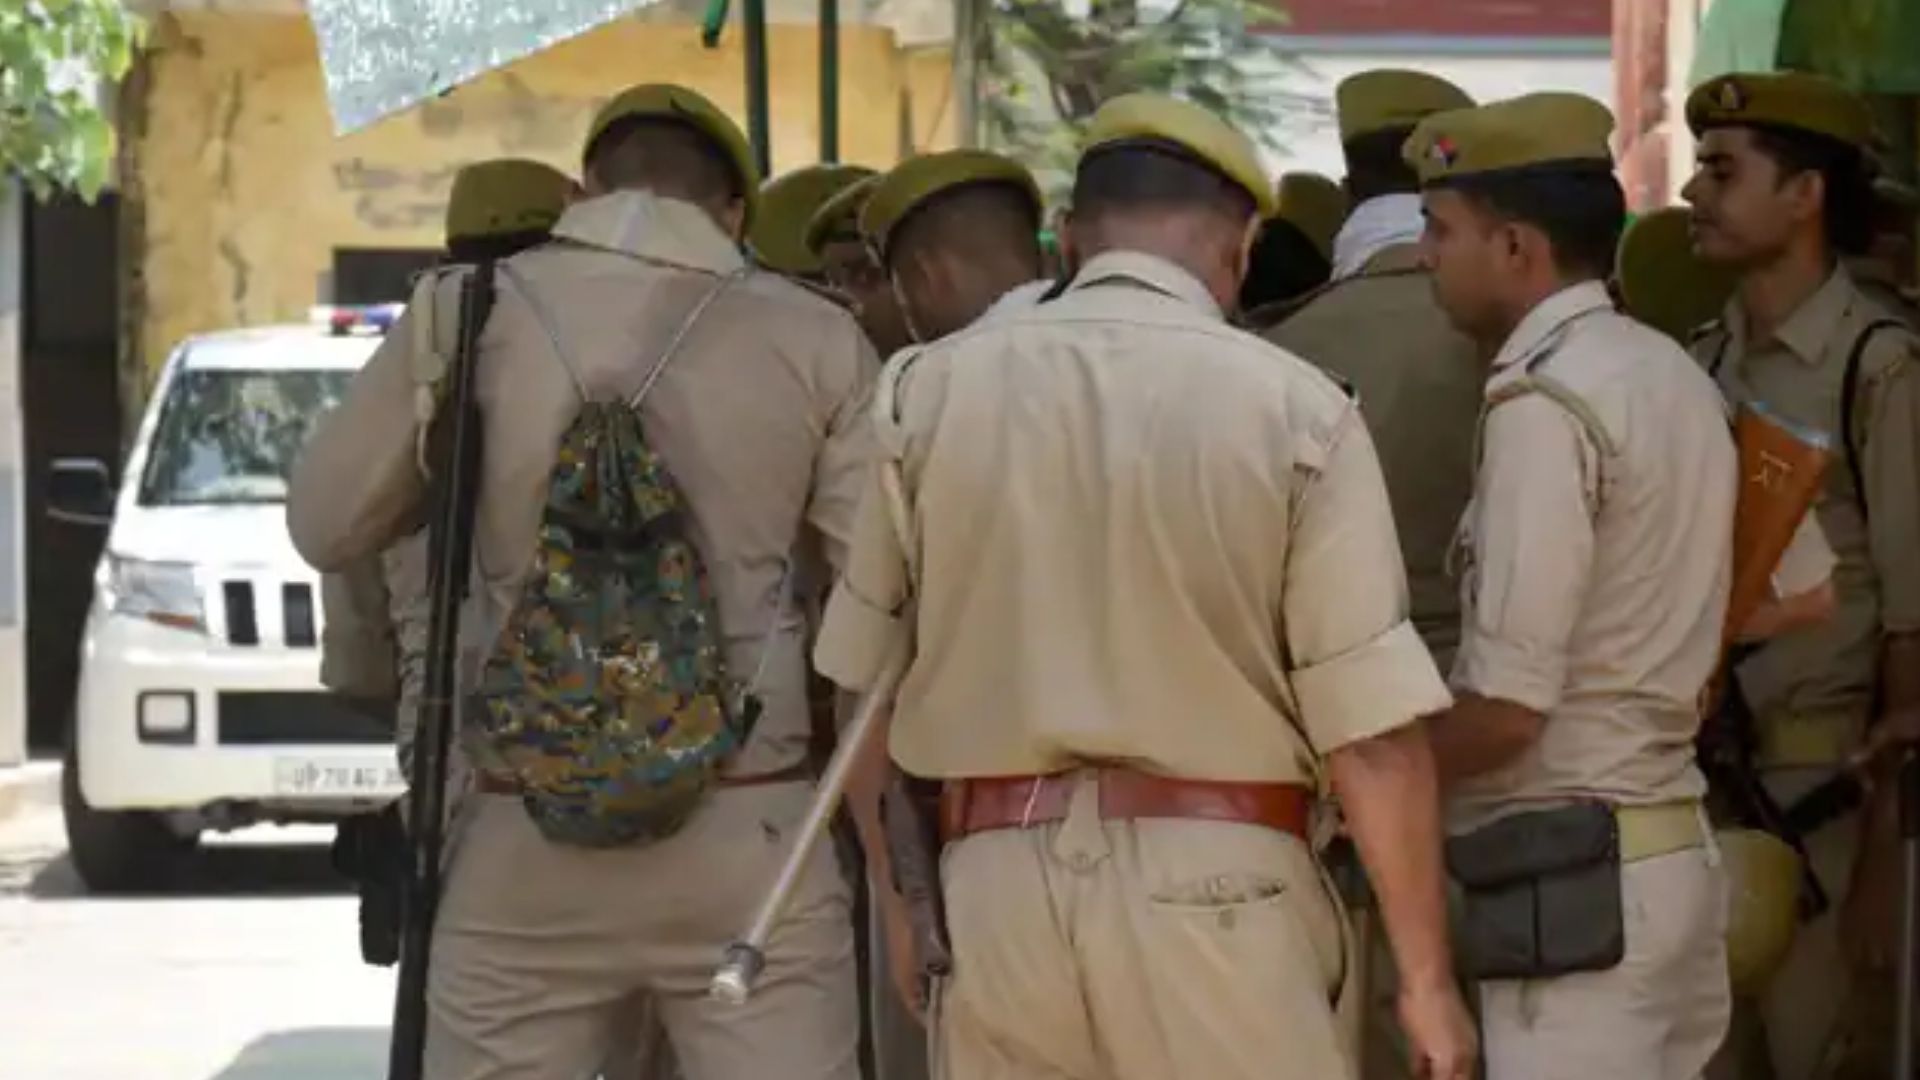 Security Alert in Ayodhya as Anti-Terrorist Squad Detains Three Suspicious Individuals Ahead of Ram Temple Ceremony